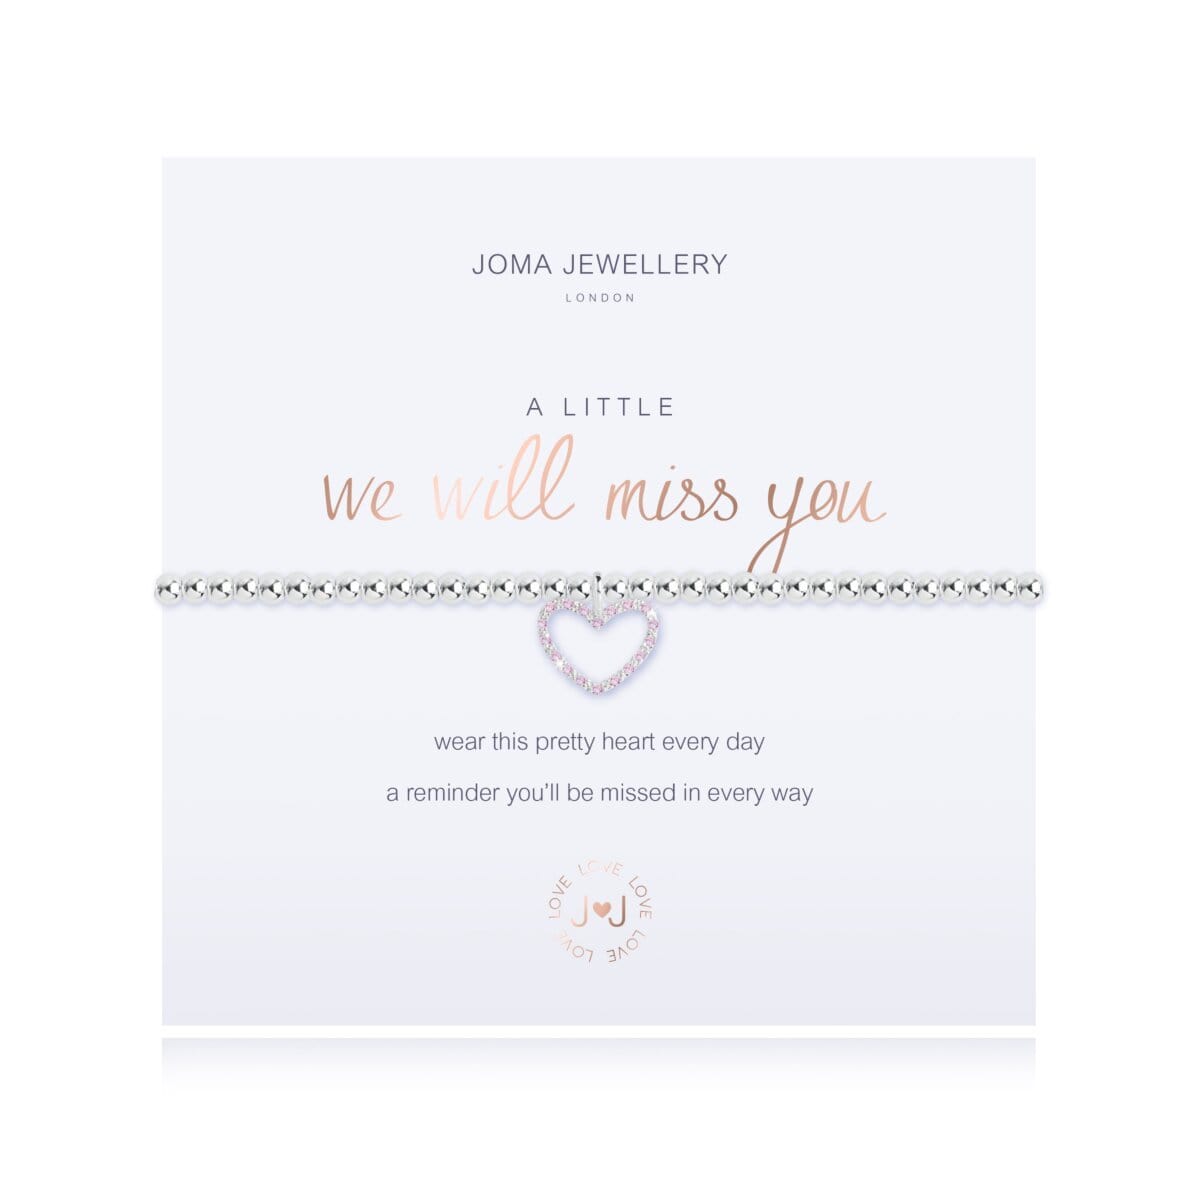 Joma Jewellery Bracelet Joma Jewellery Bracelet - A Little We Will Miss You